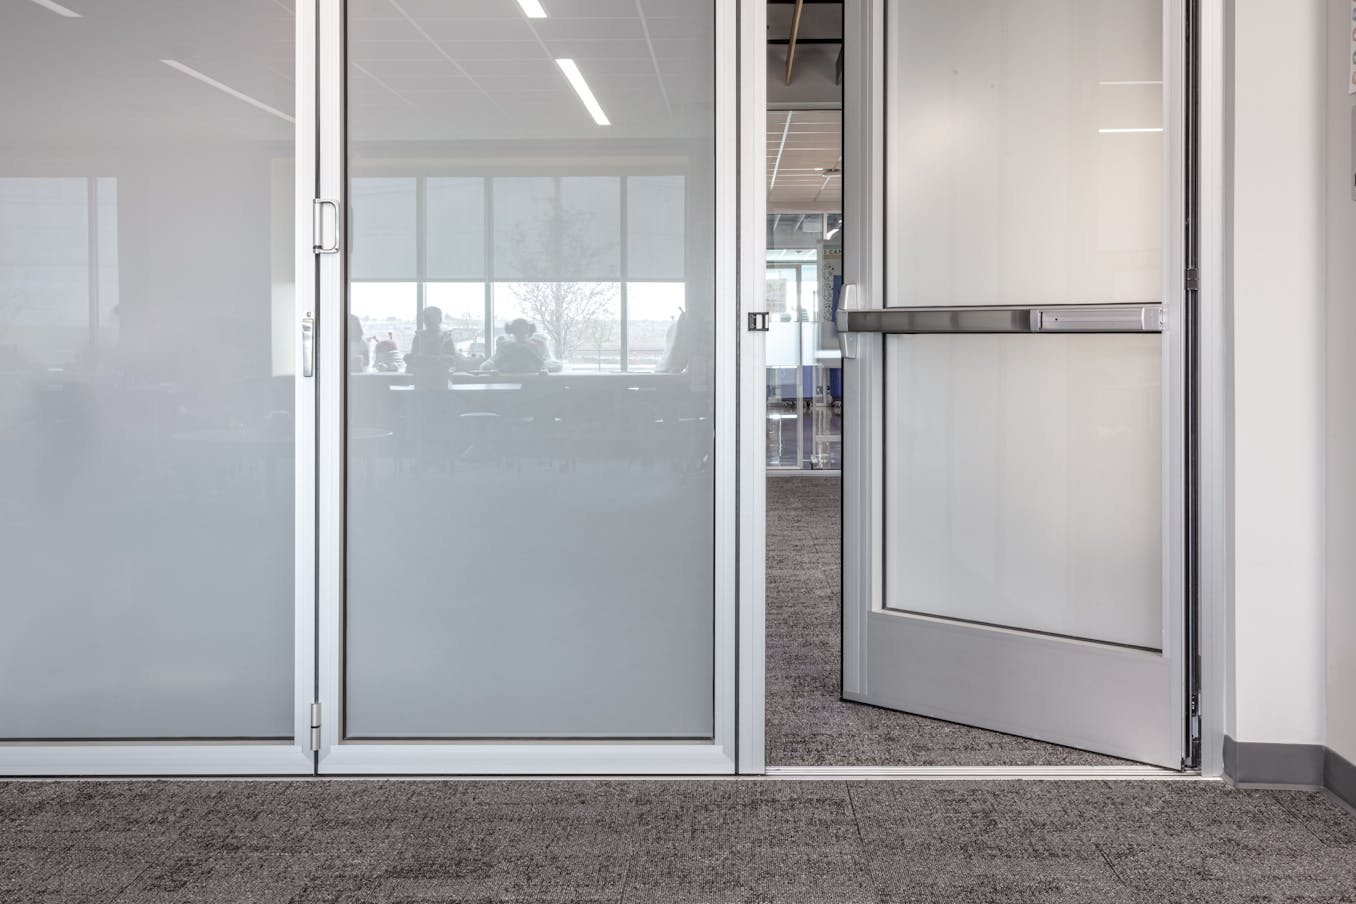 A classroom featuring frosted glass doors and swing door